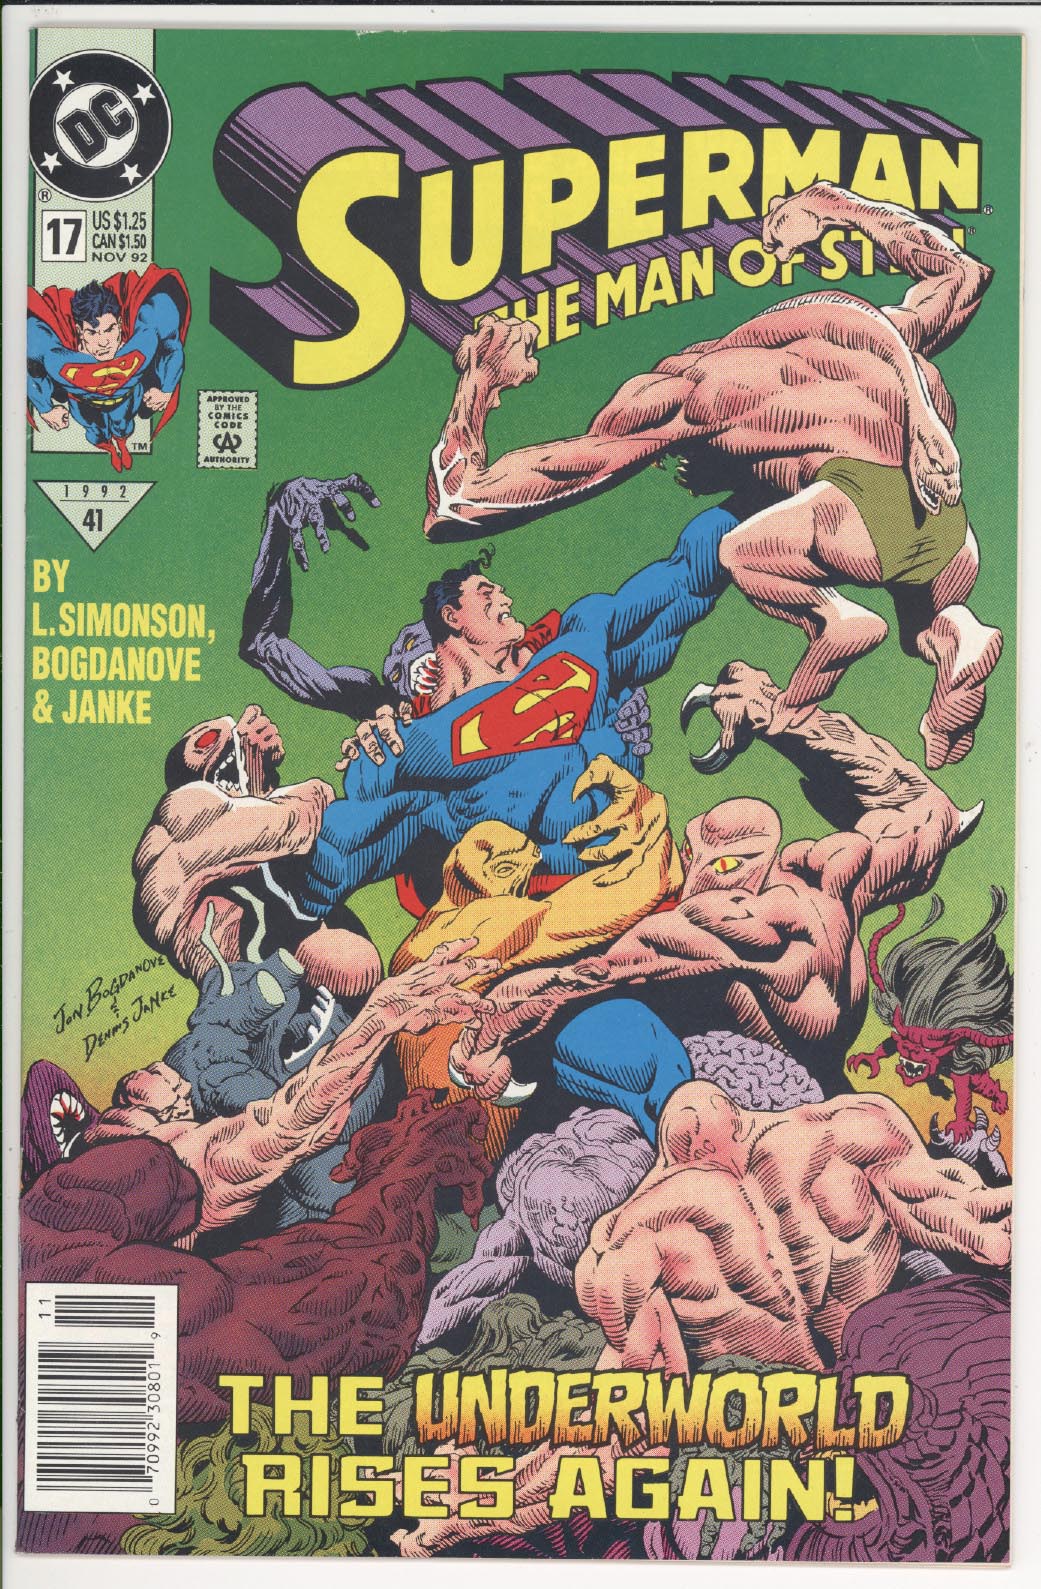 Superman The Man of Steel #17 front